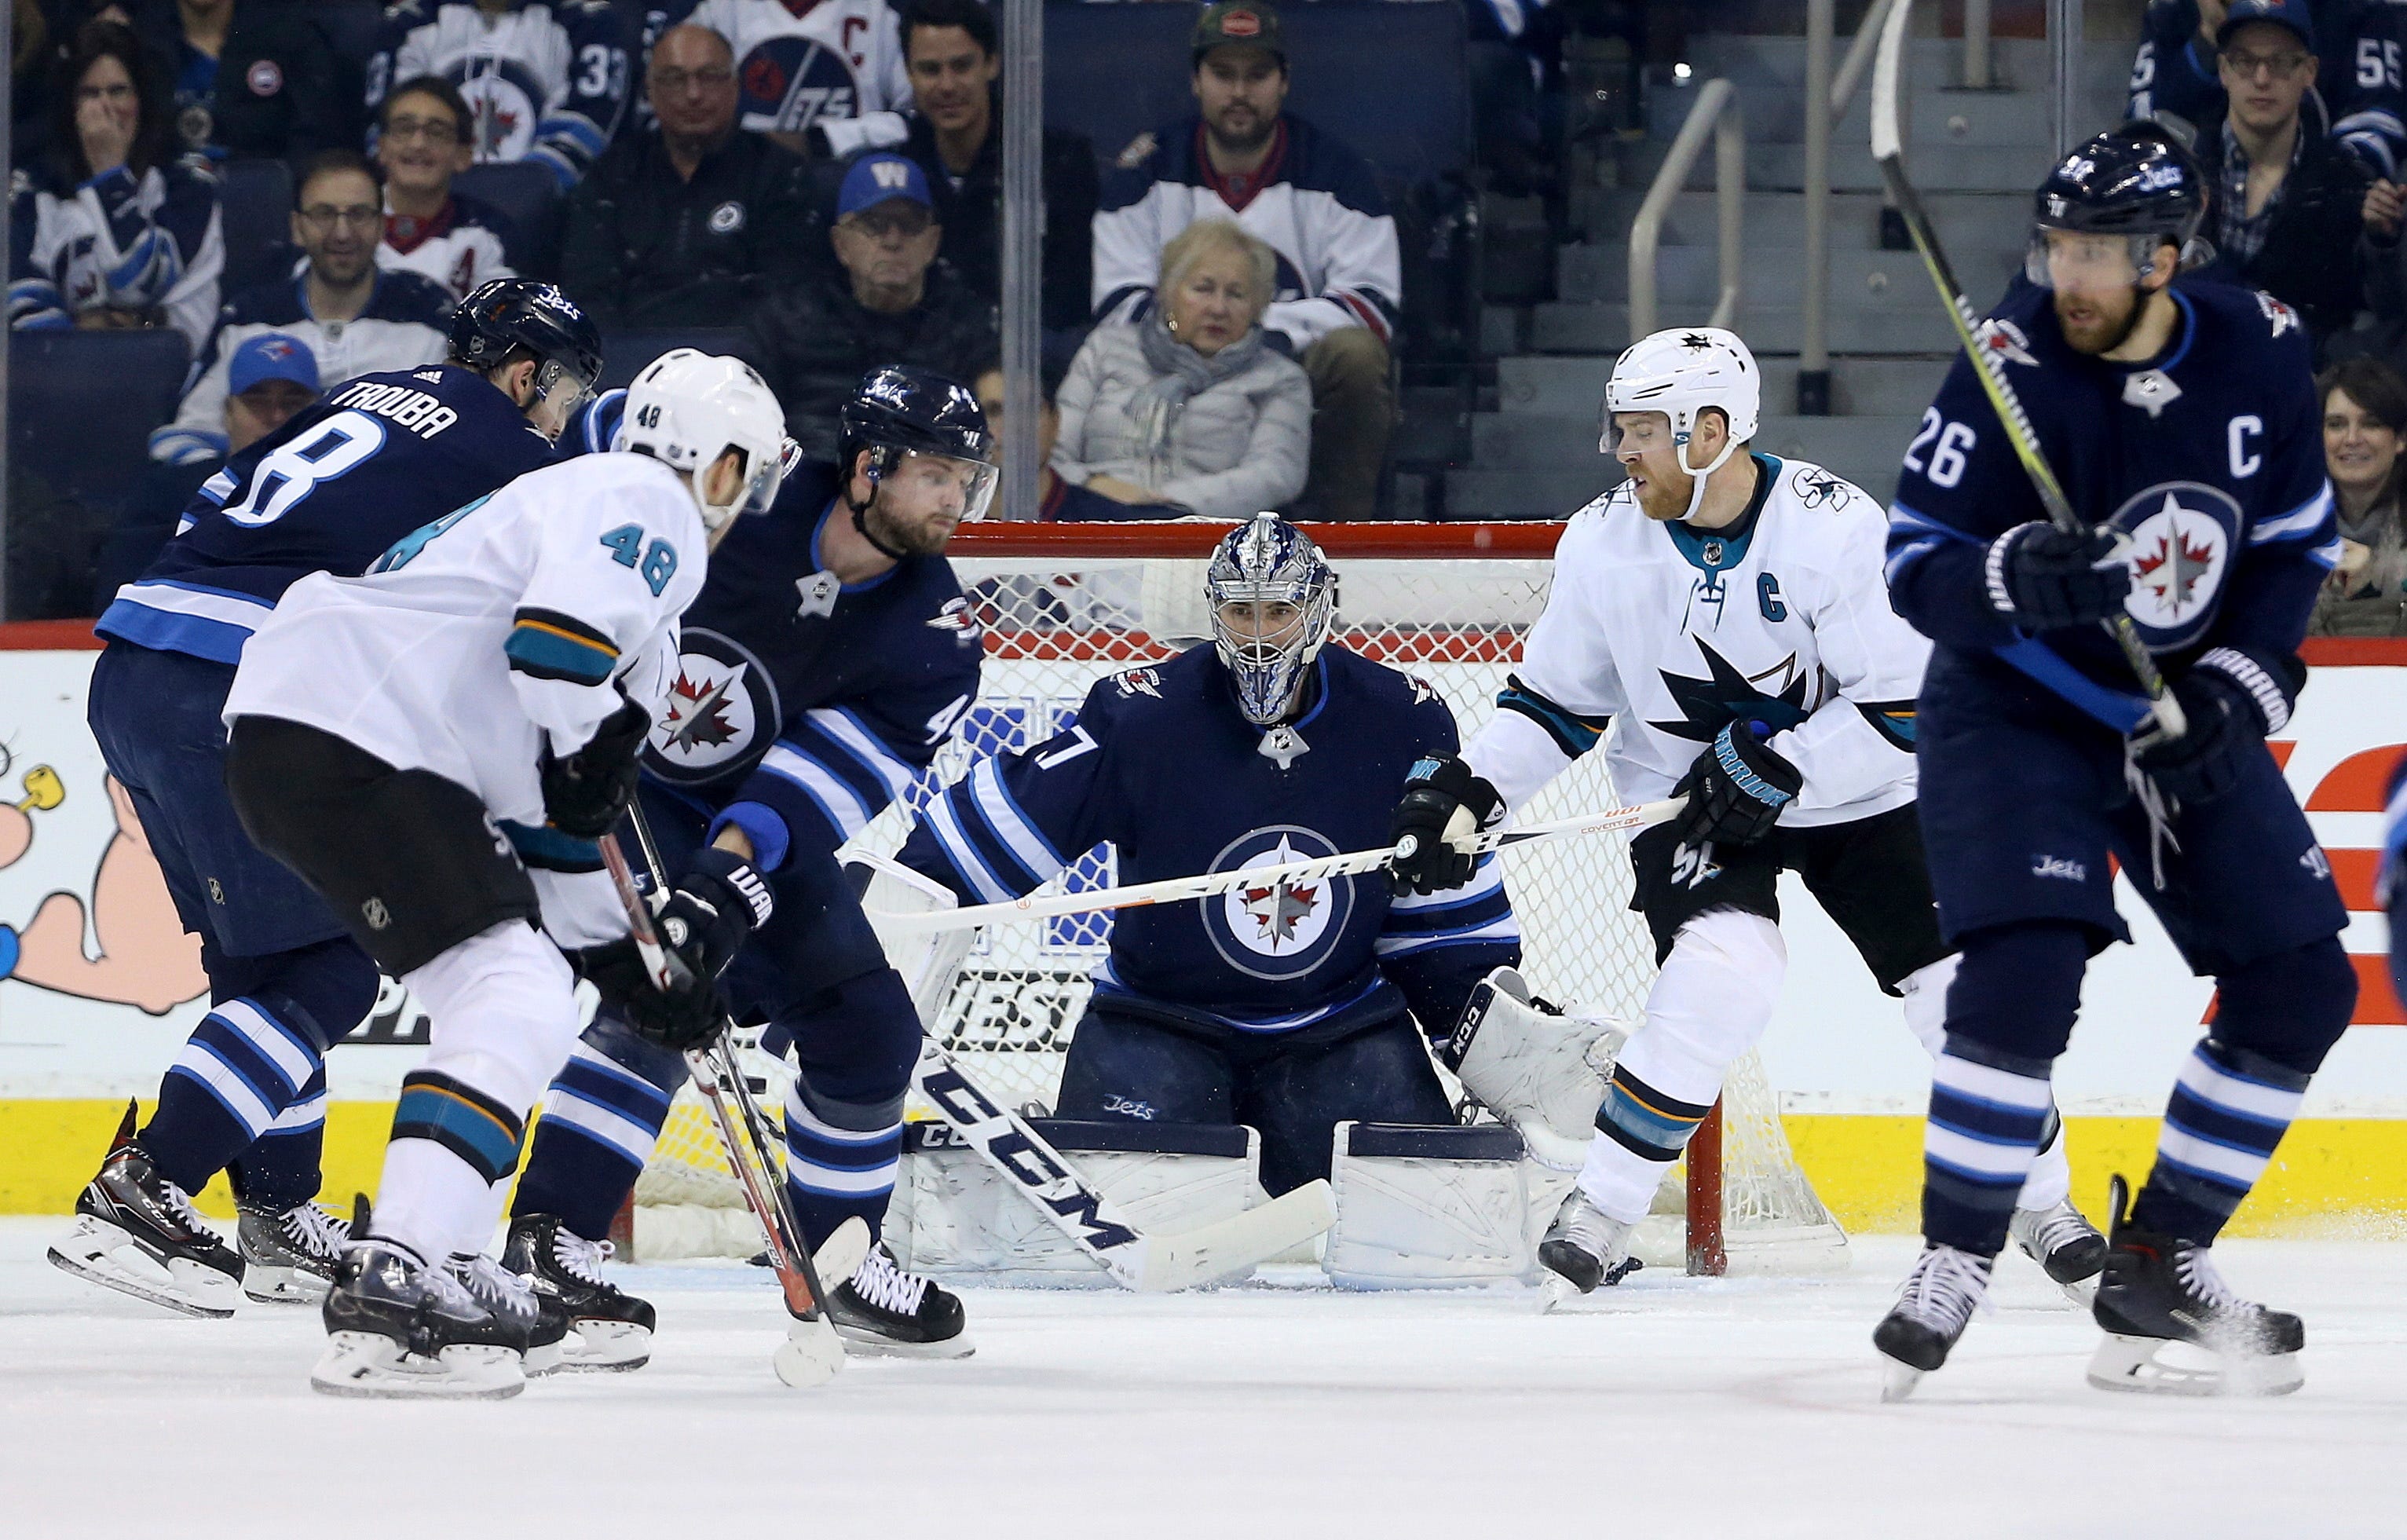 Mathieu Perreault scores twice to help Jets beat Sharks 4-1